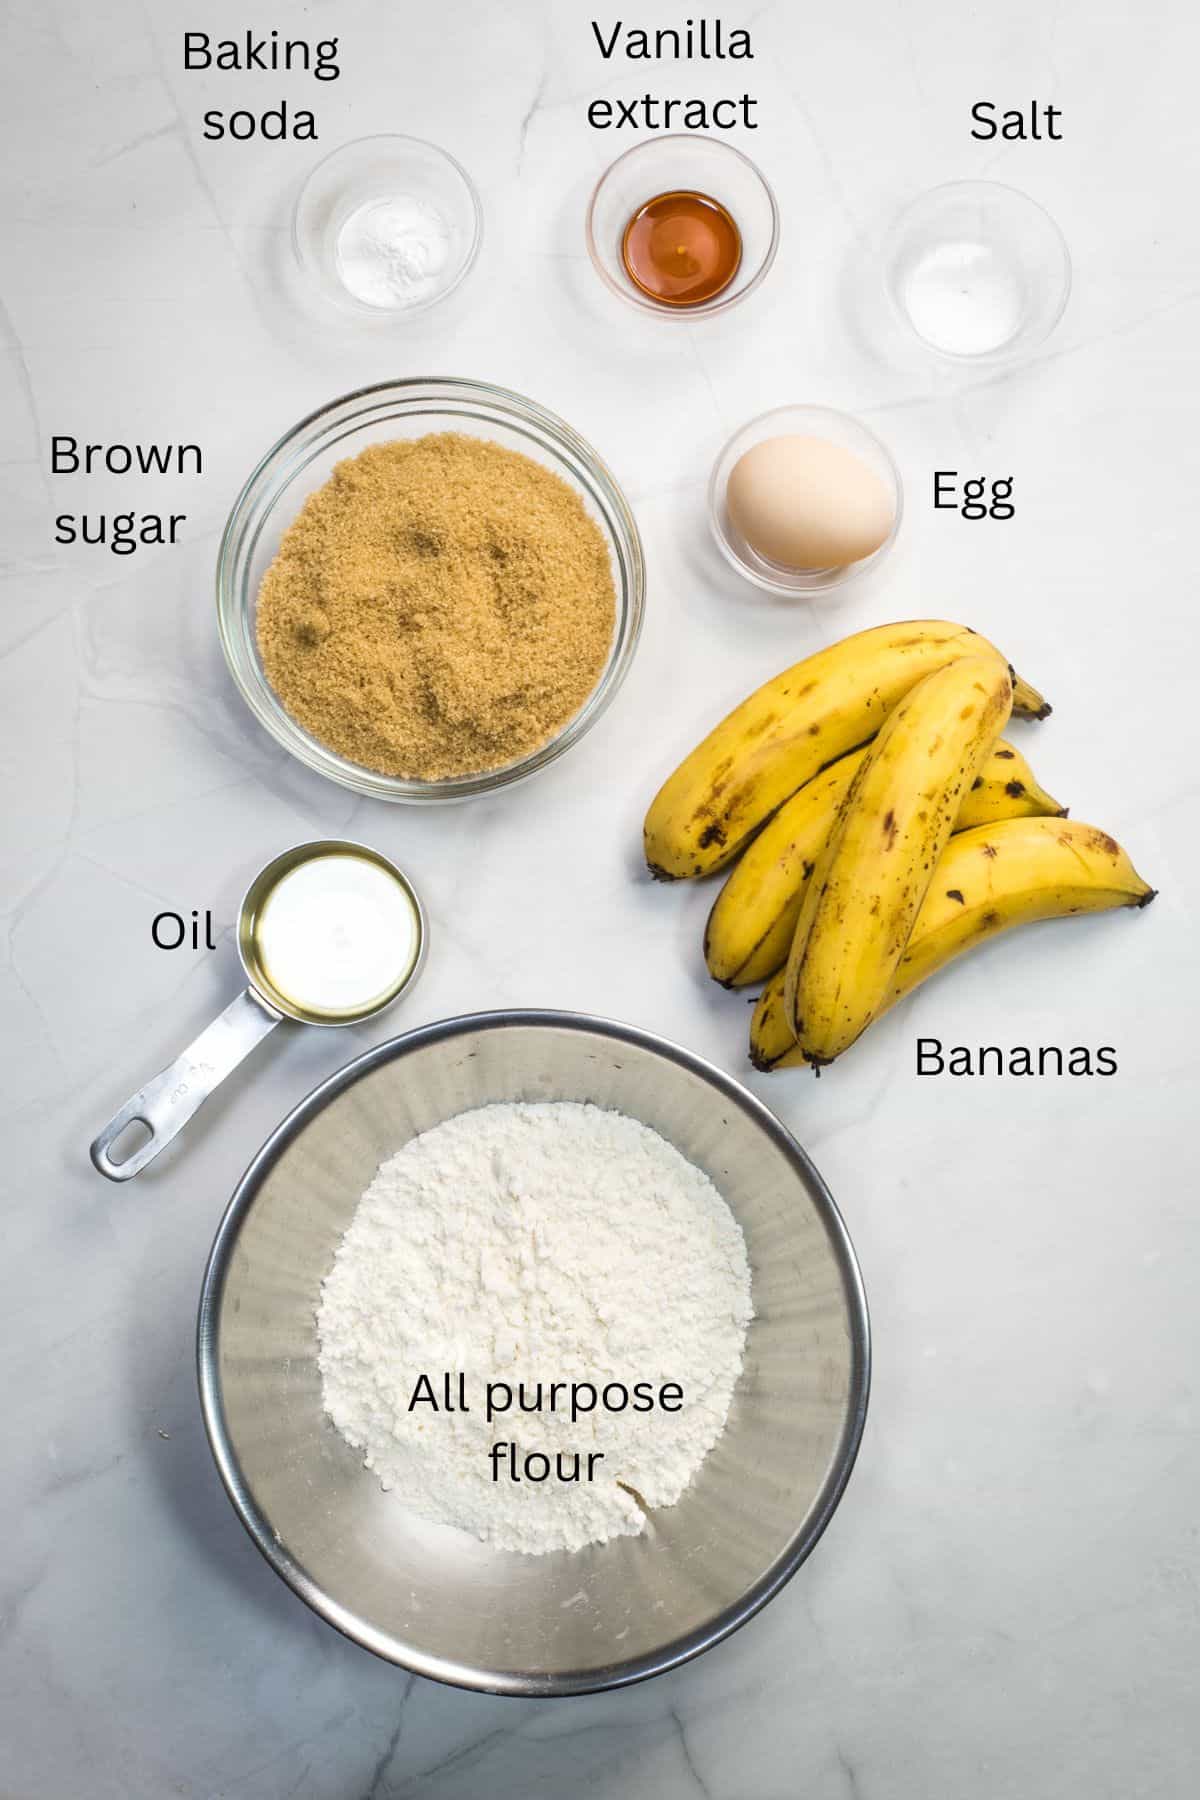 All purpose flour, oil, brown sugar, egg, bananas, baking soda, salt and vanilla extract against a marble background.